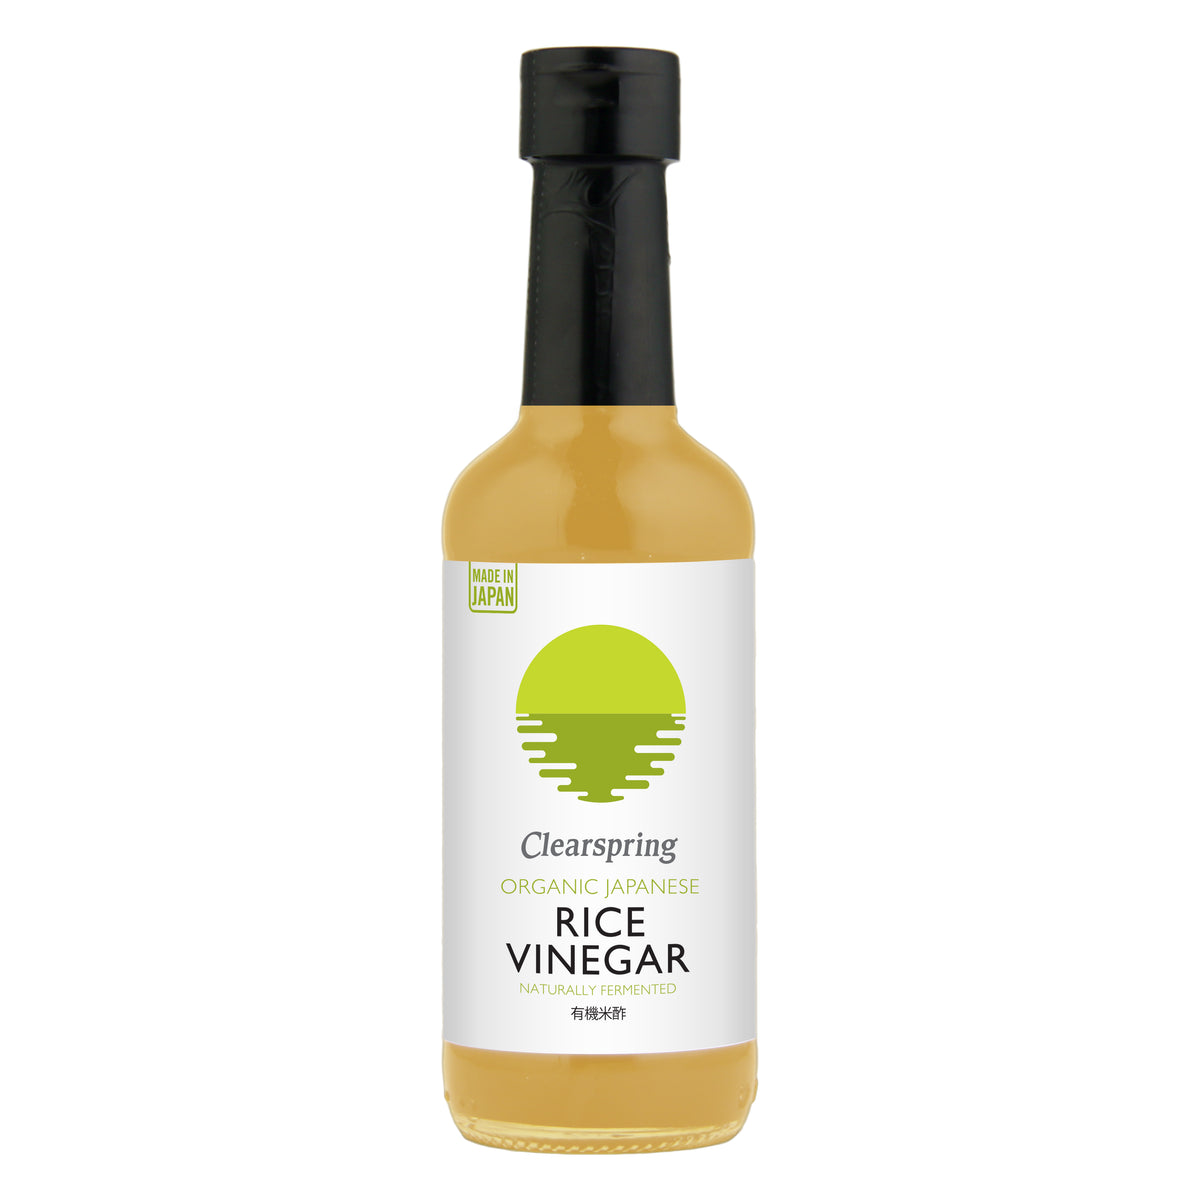 Organic Japanese Rice Vinegar | Clearspring | Raw Living | Clearspring Organic Japanese Rice Vinegar has a full-bodied yet gentle character. Its exquisite quality comes from using organic brown rice &amp; slow maturation.